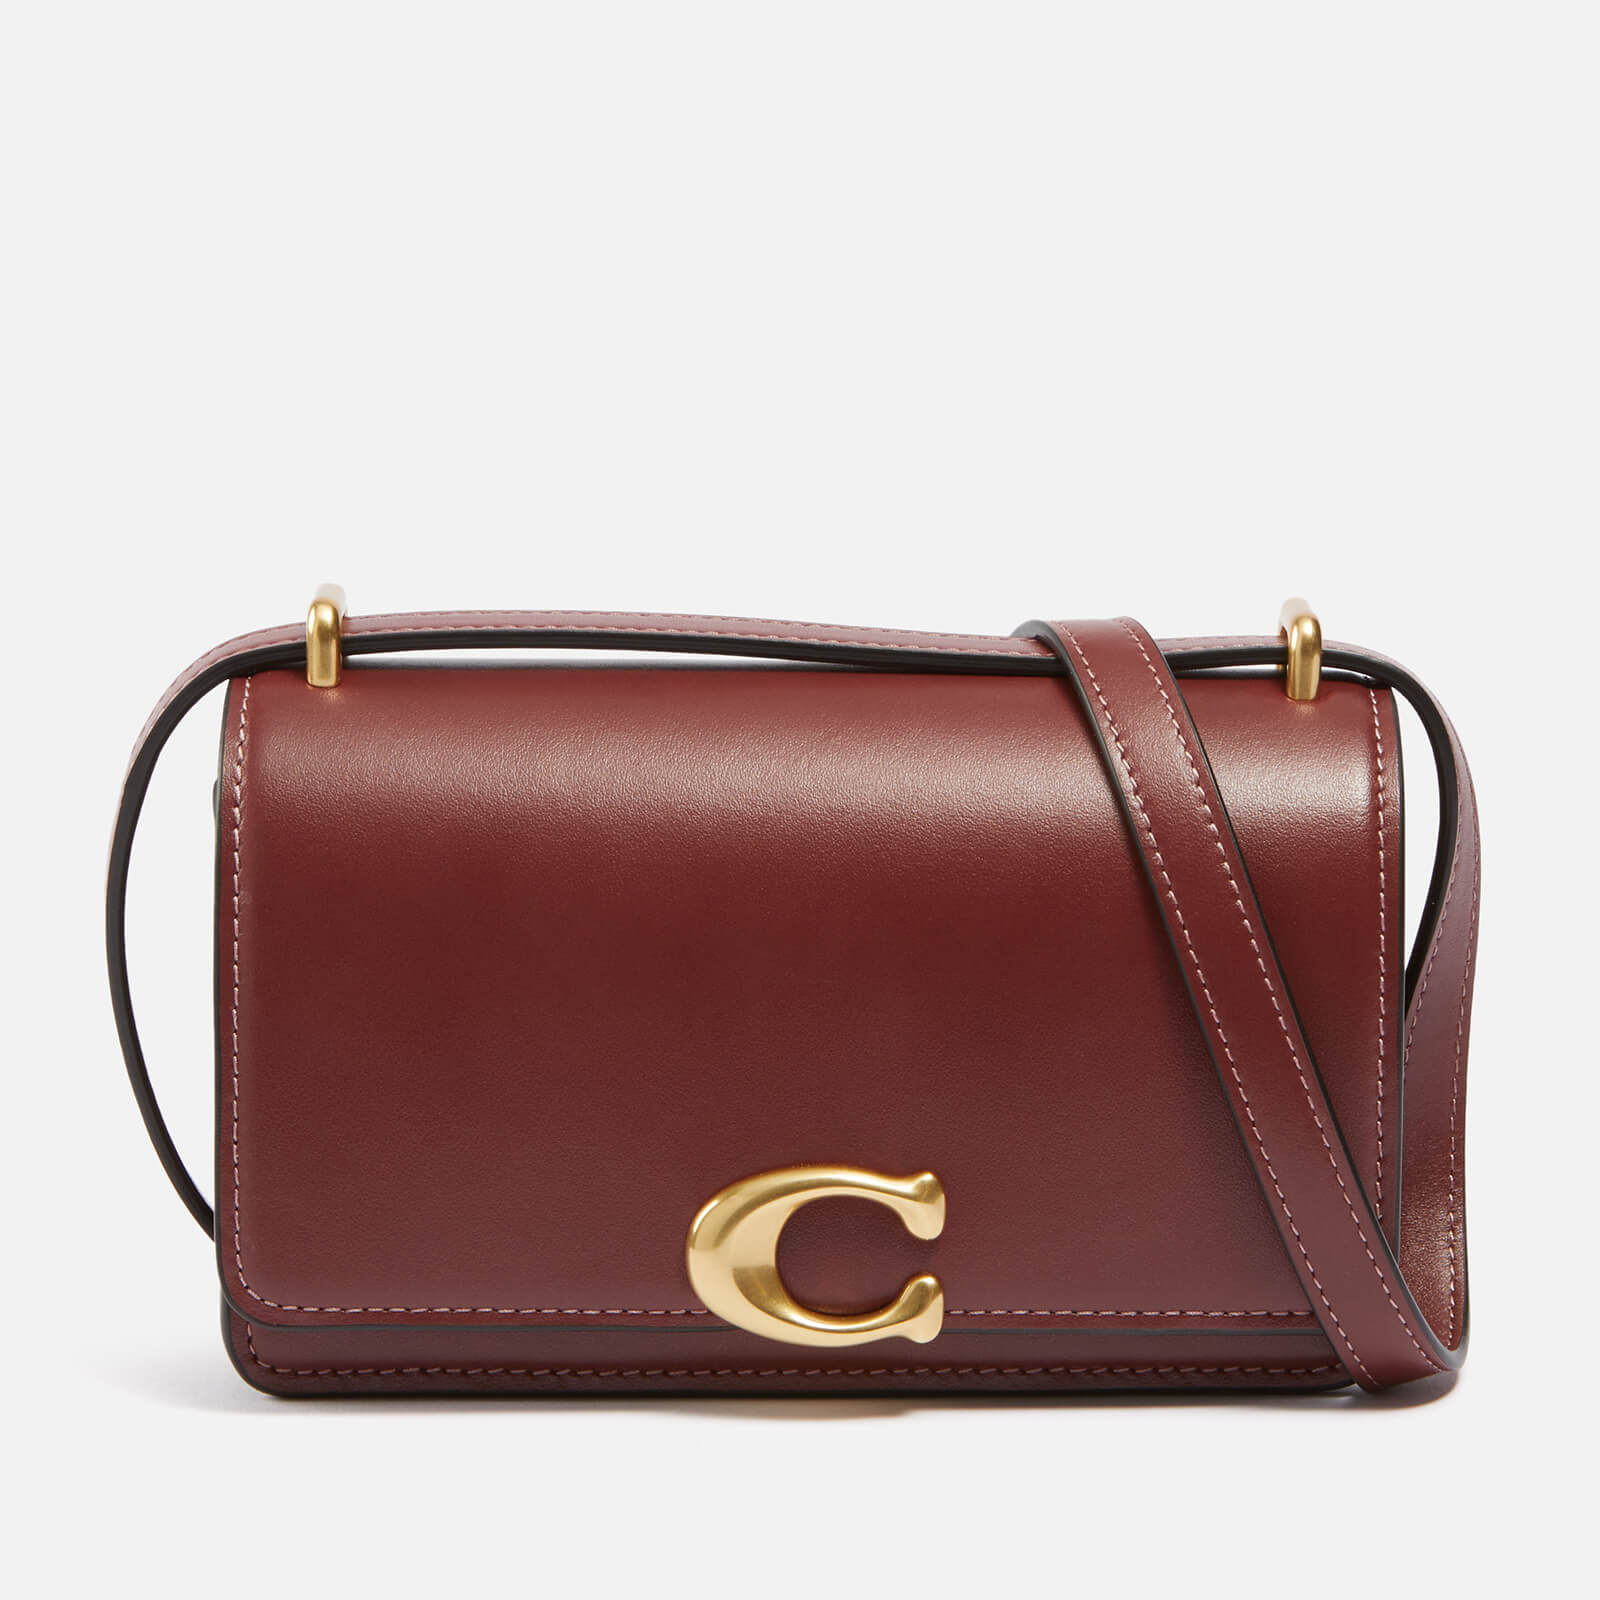 Coach Bandit Luxe Refined Calf Leather Cross Body Bag - Wine